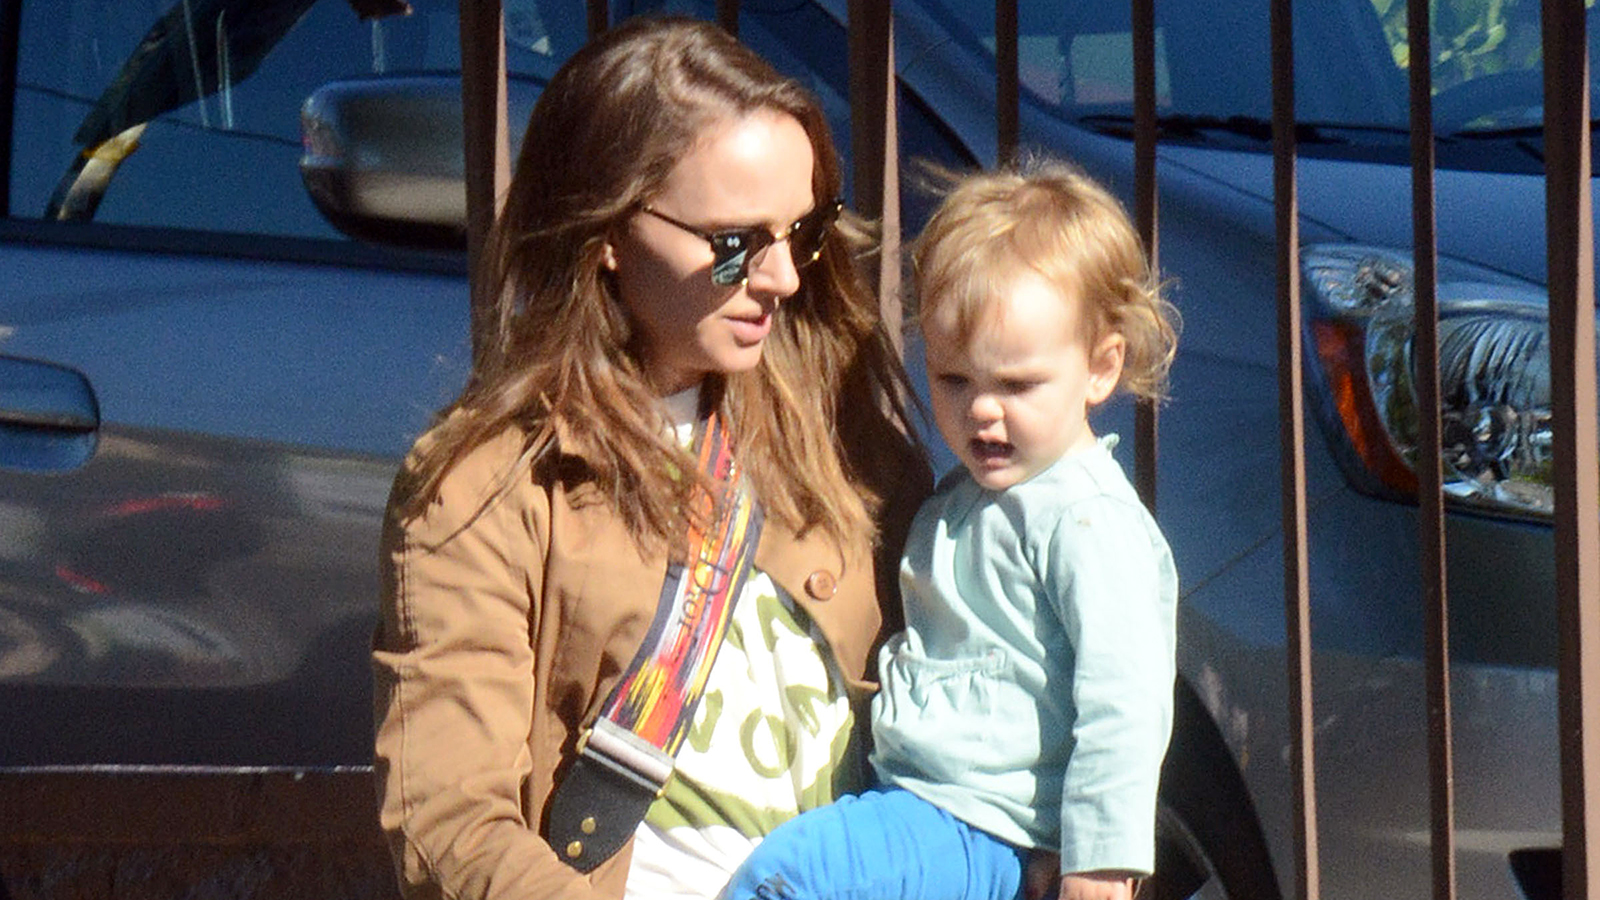 Natalie Portman Goes On Vegan Shopping Trip With Daughter Amalia Amalia millepied is mostly known as a celebrity kid and she is very young to set the footprints on her own. natalie portman goes on vegan shopping trip with daughter amalia